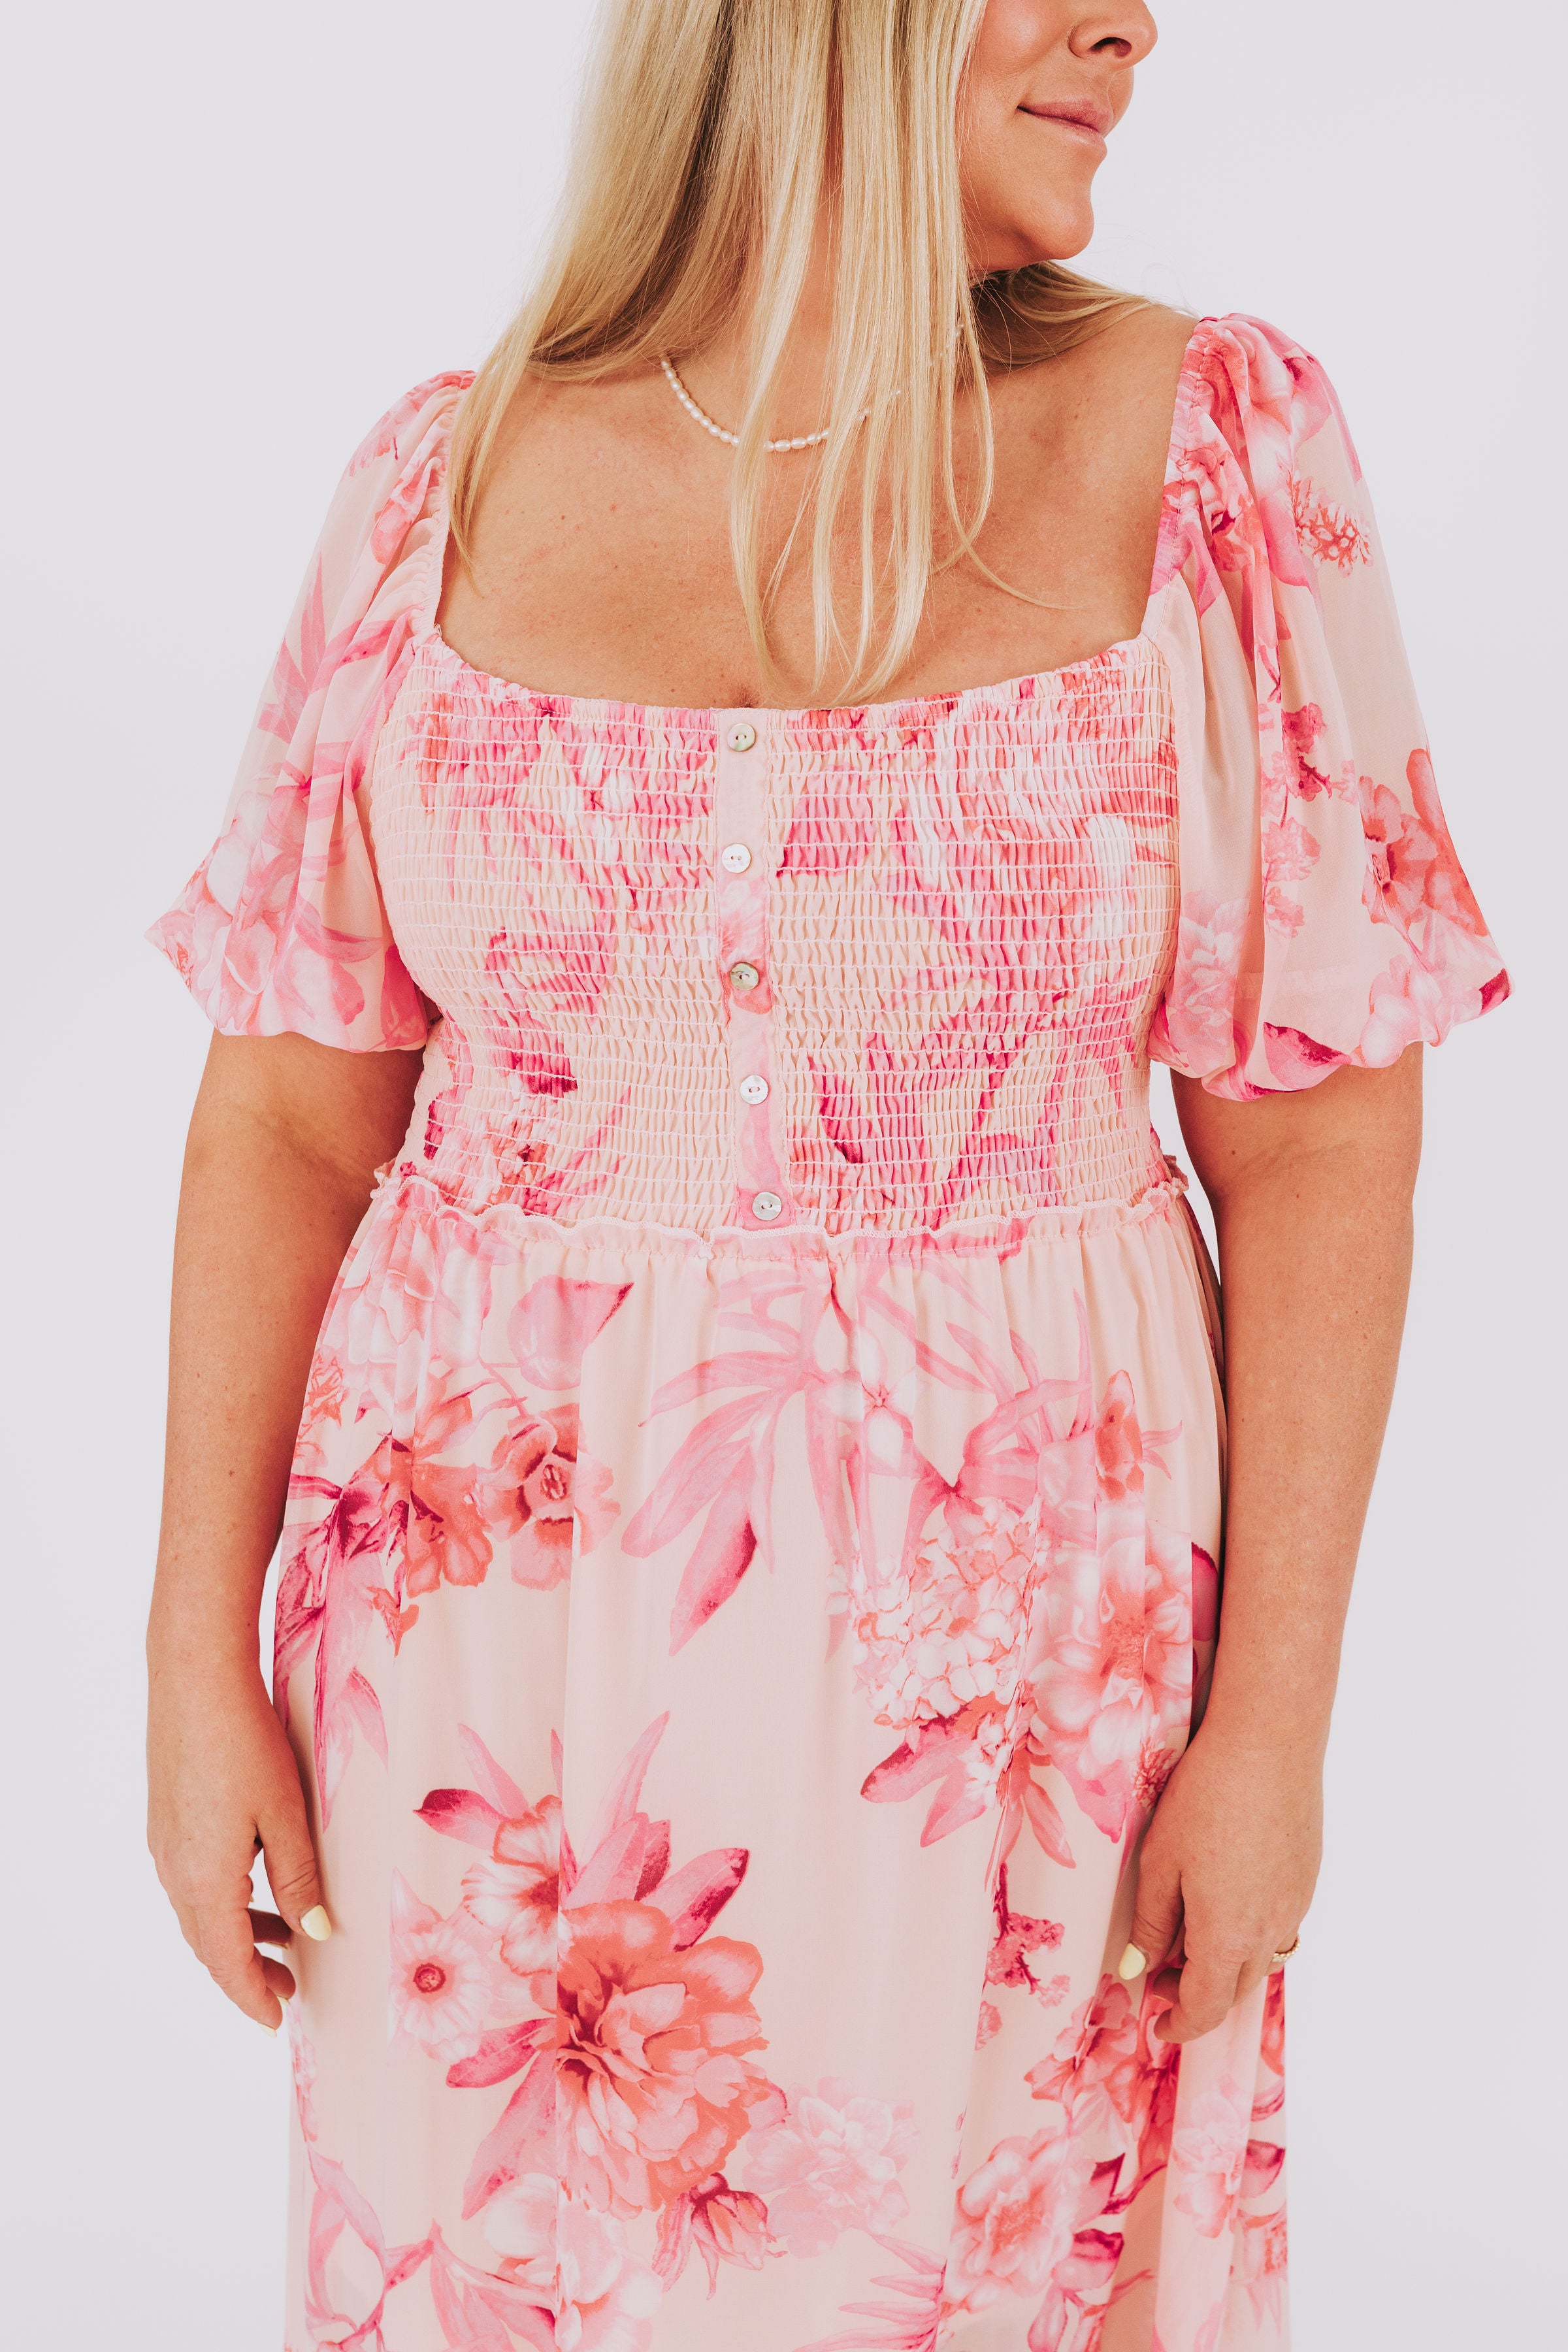 PLUS SIZE - This One Time Dress